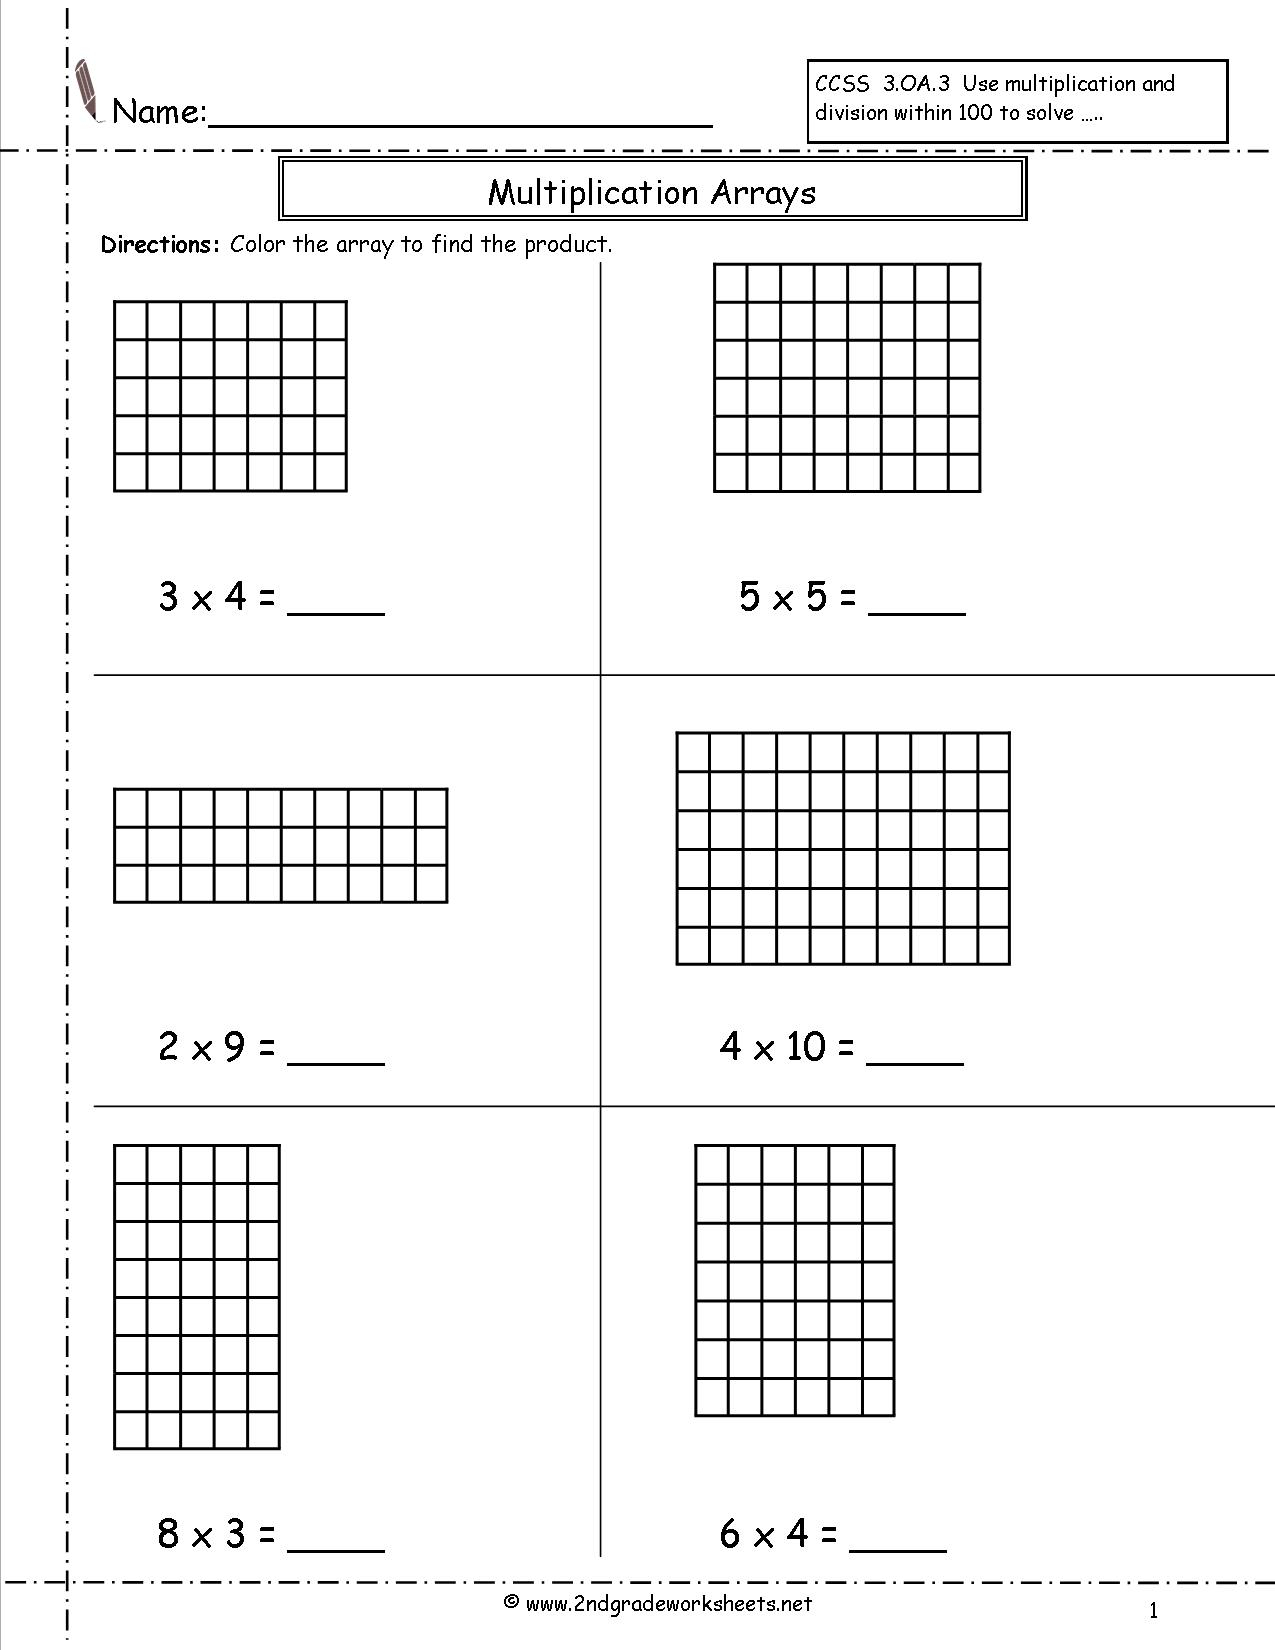 Multiplication Arrays Worksheets throughout Printable Multiplication Array Worksheets